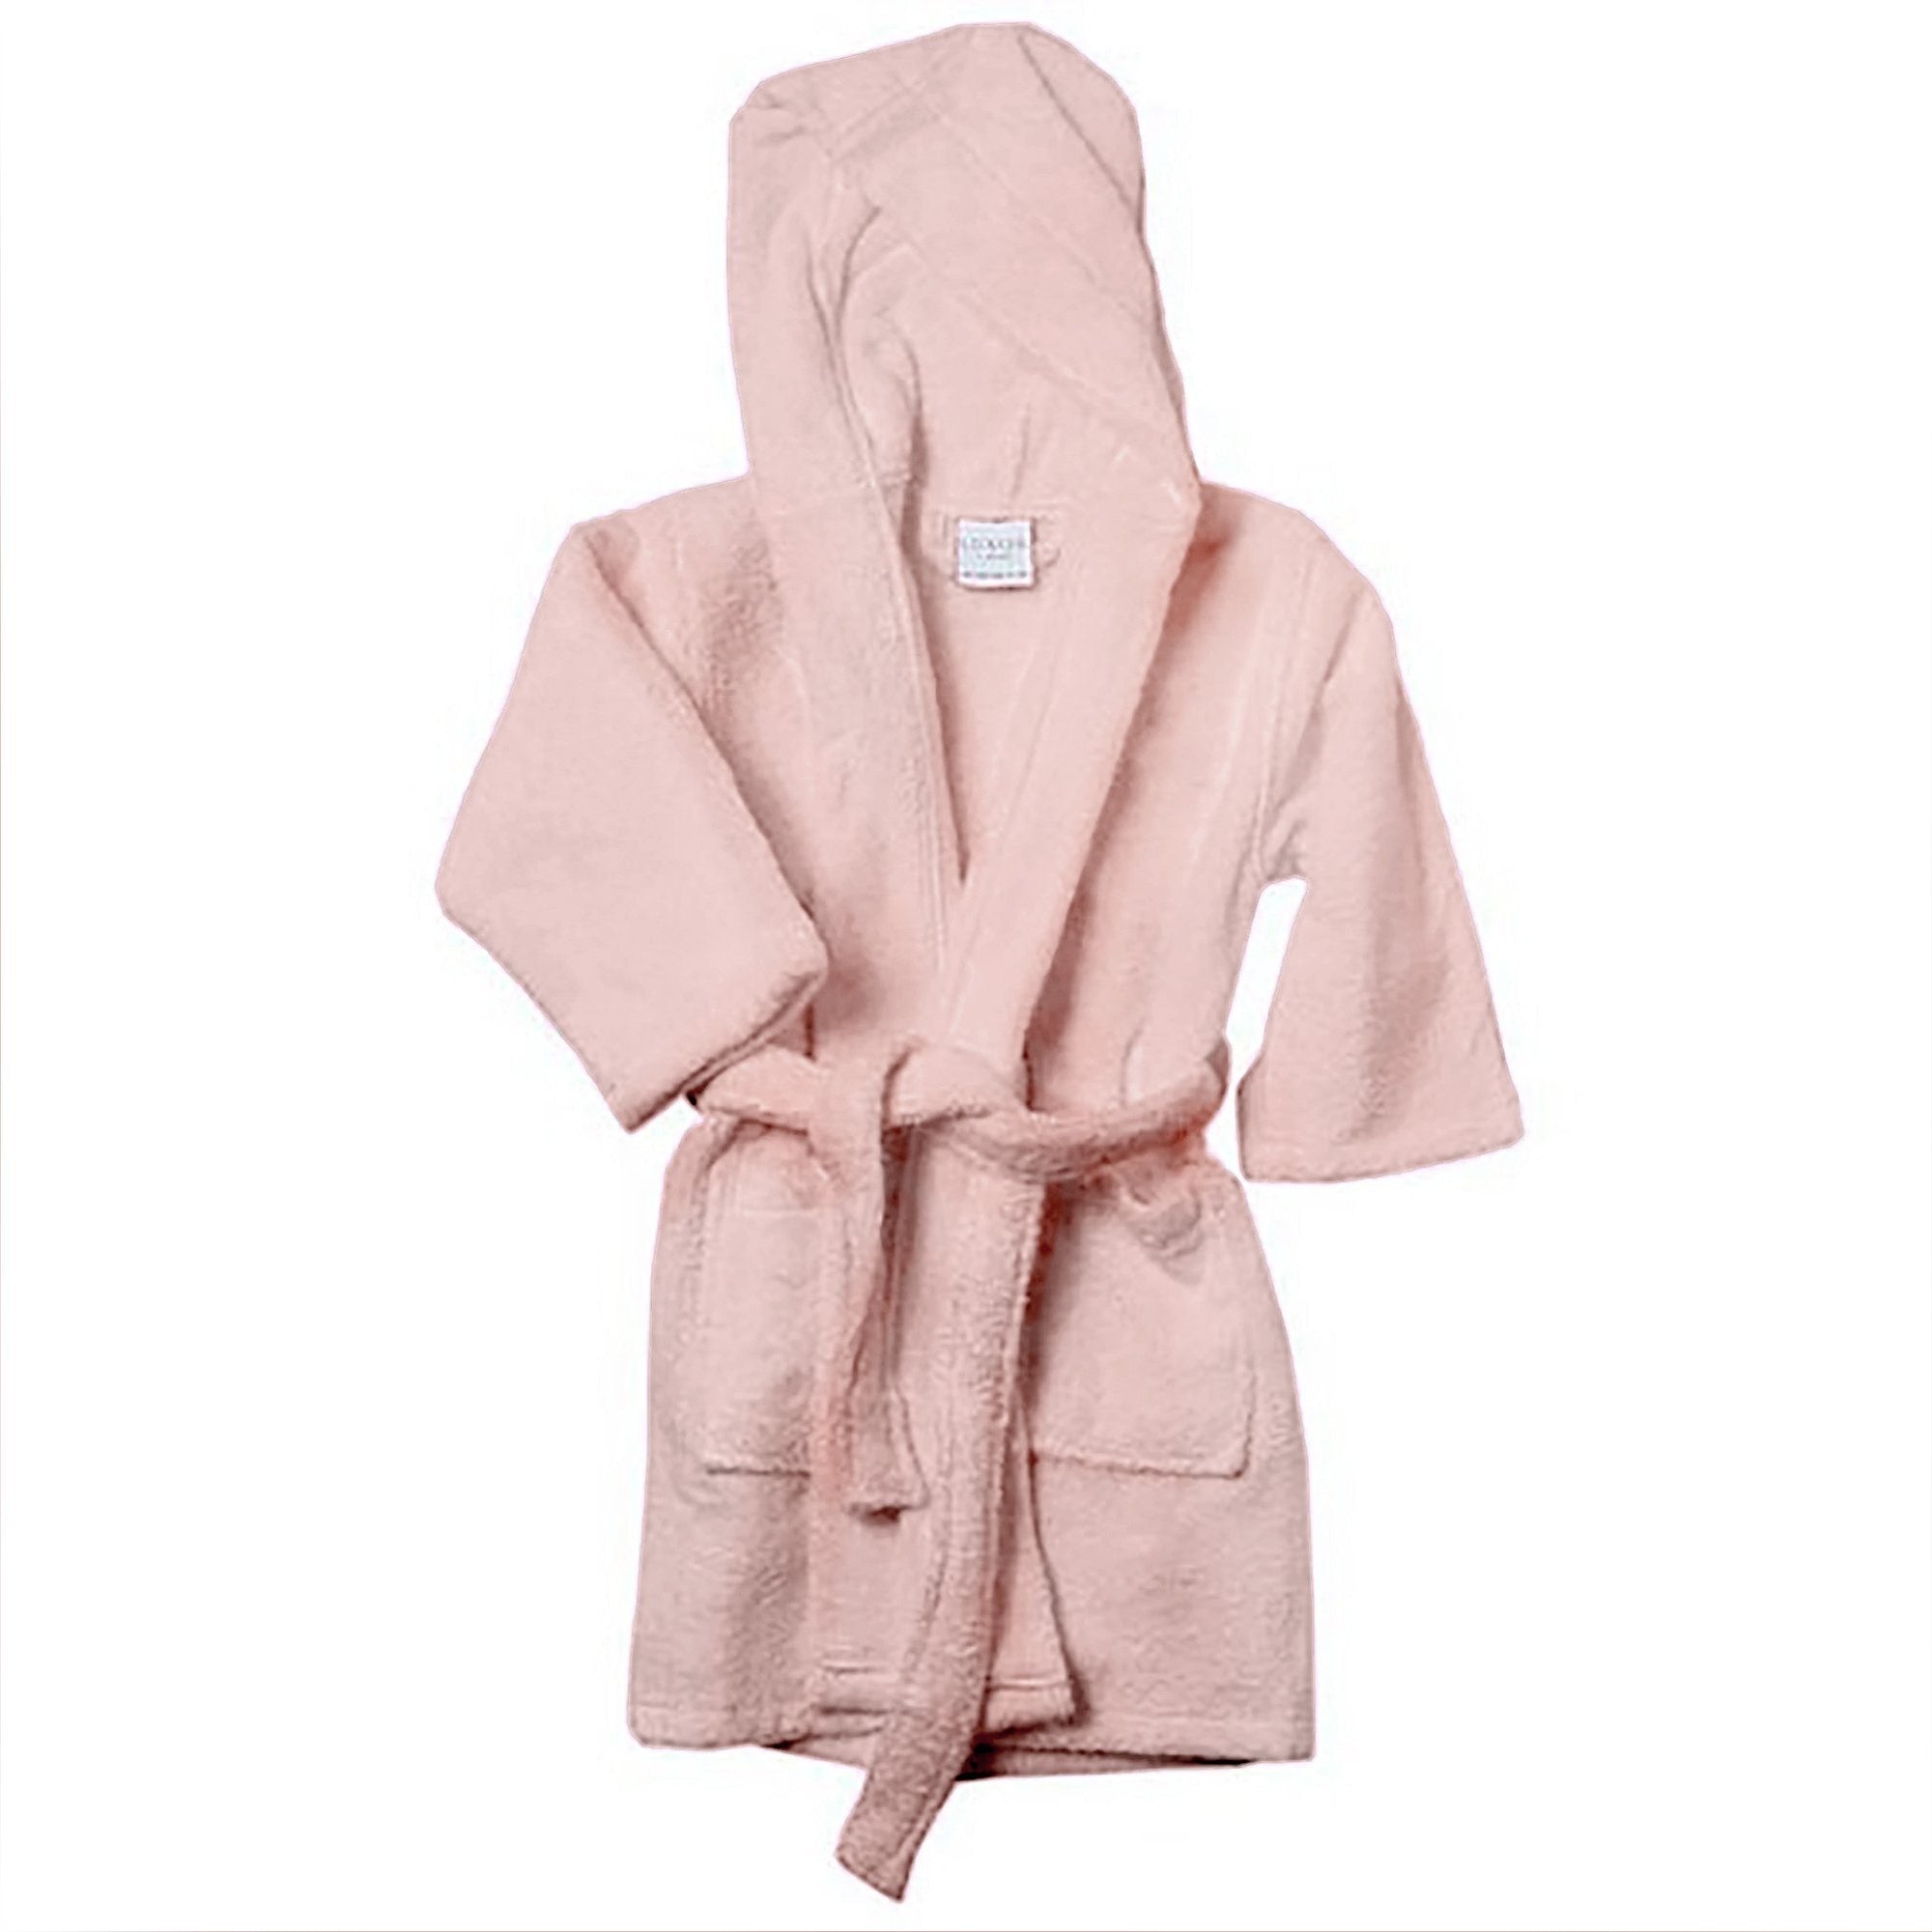 Soft Satin Silk Pajama Pink Satin Robe For Girls Solid Color Sleepwear And Dressing  Gown For Children 230601 From Pang07, $8.04 | DHgate.Com